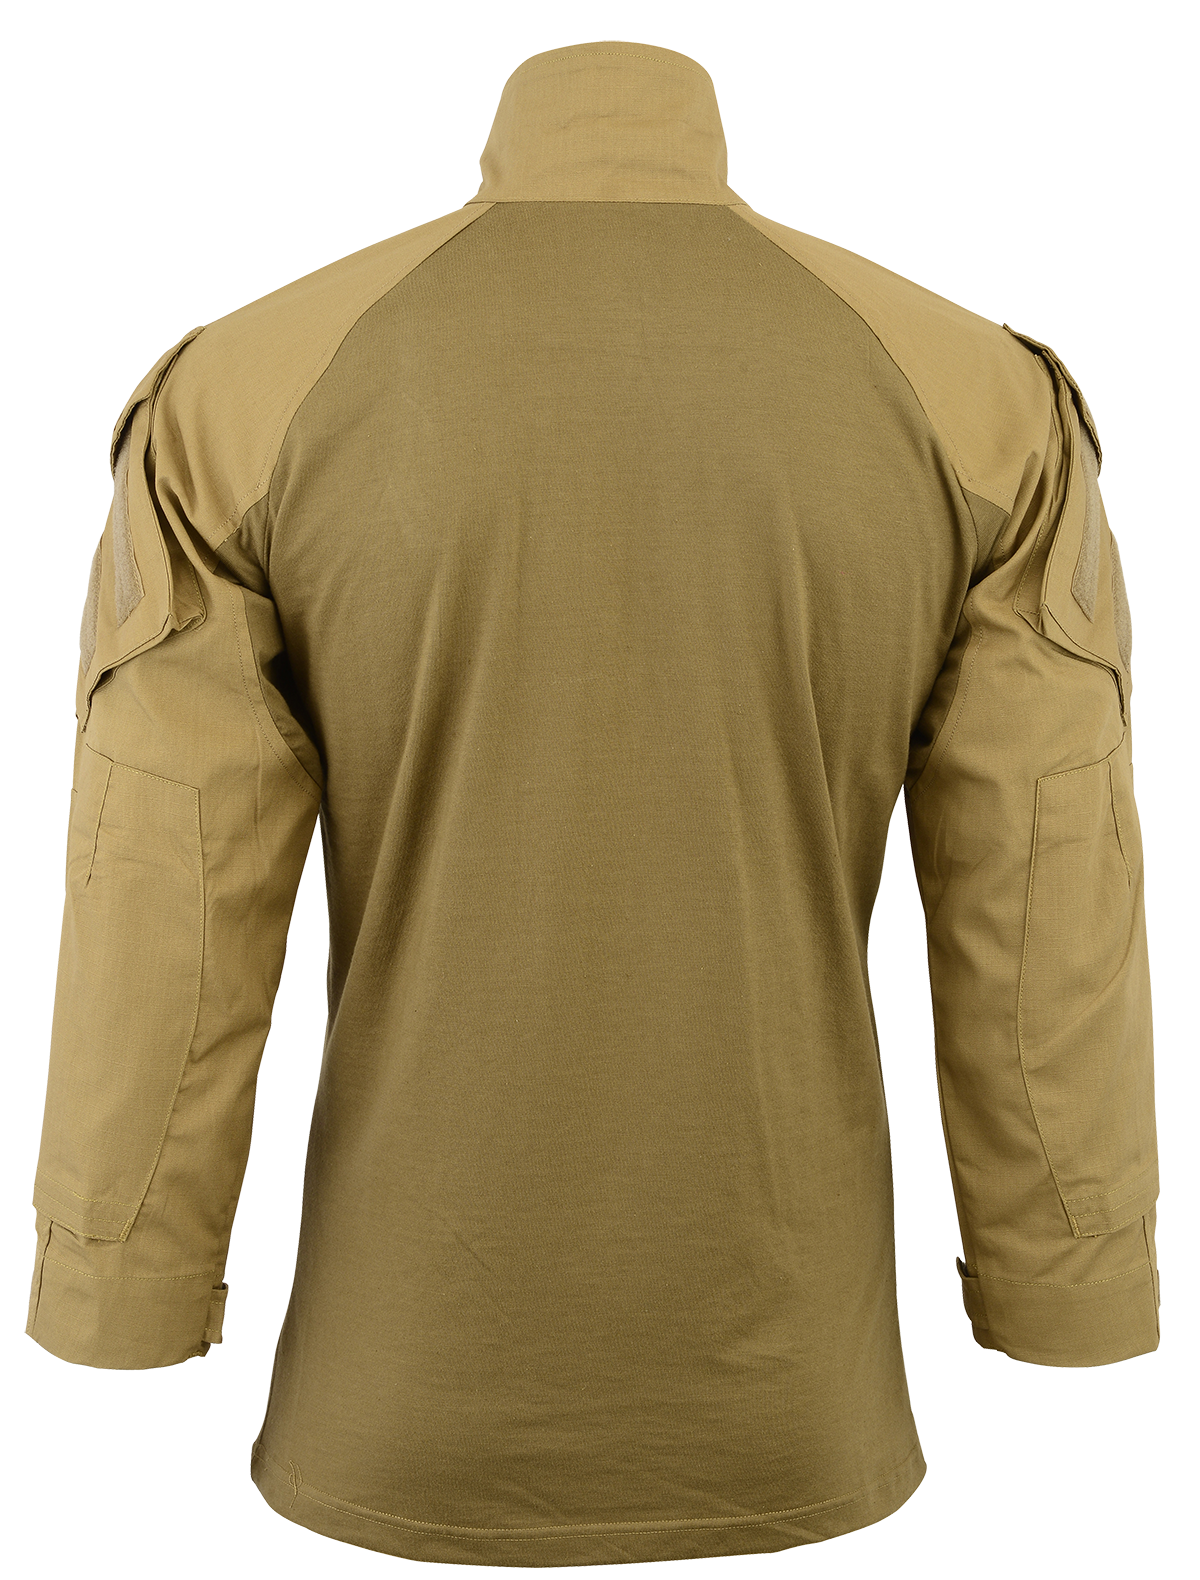 HYBRID TACTICAL SHIRT IS A PERFECT COMBAT SHIRT Colour Coyote Back